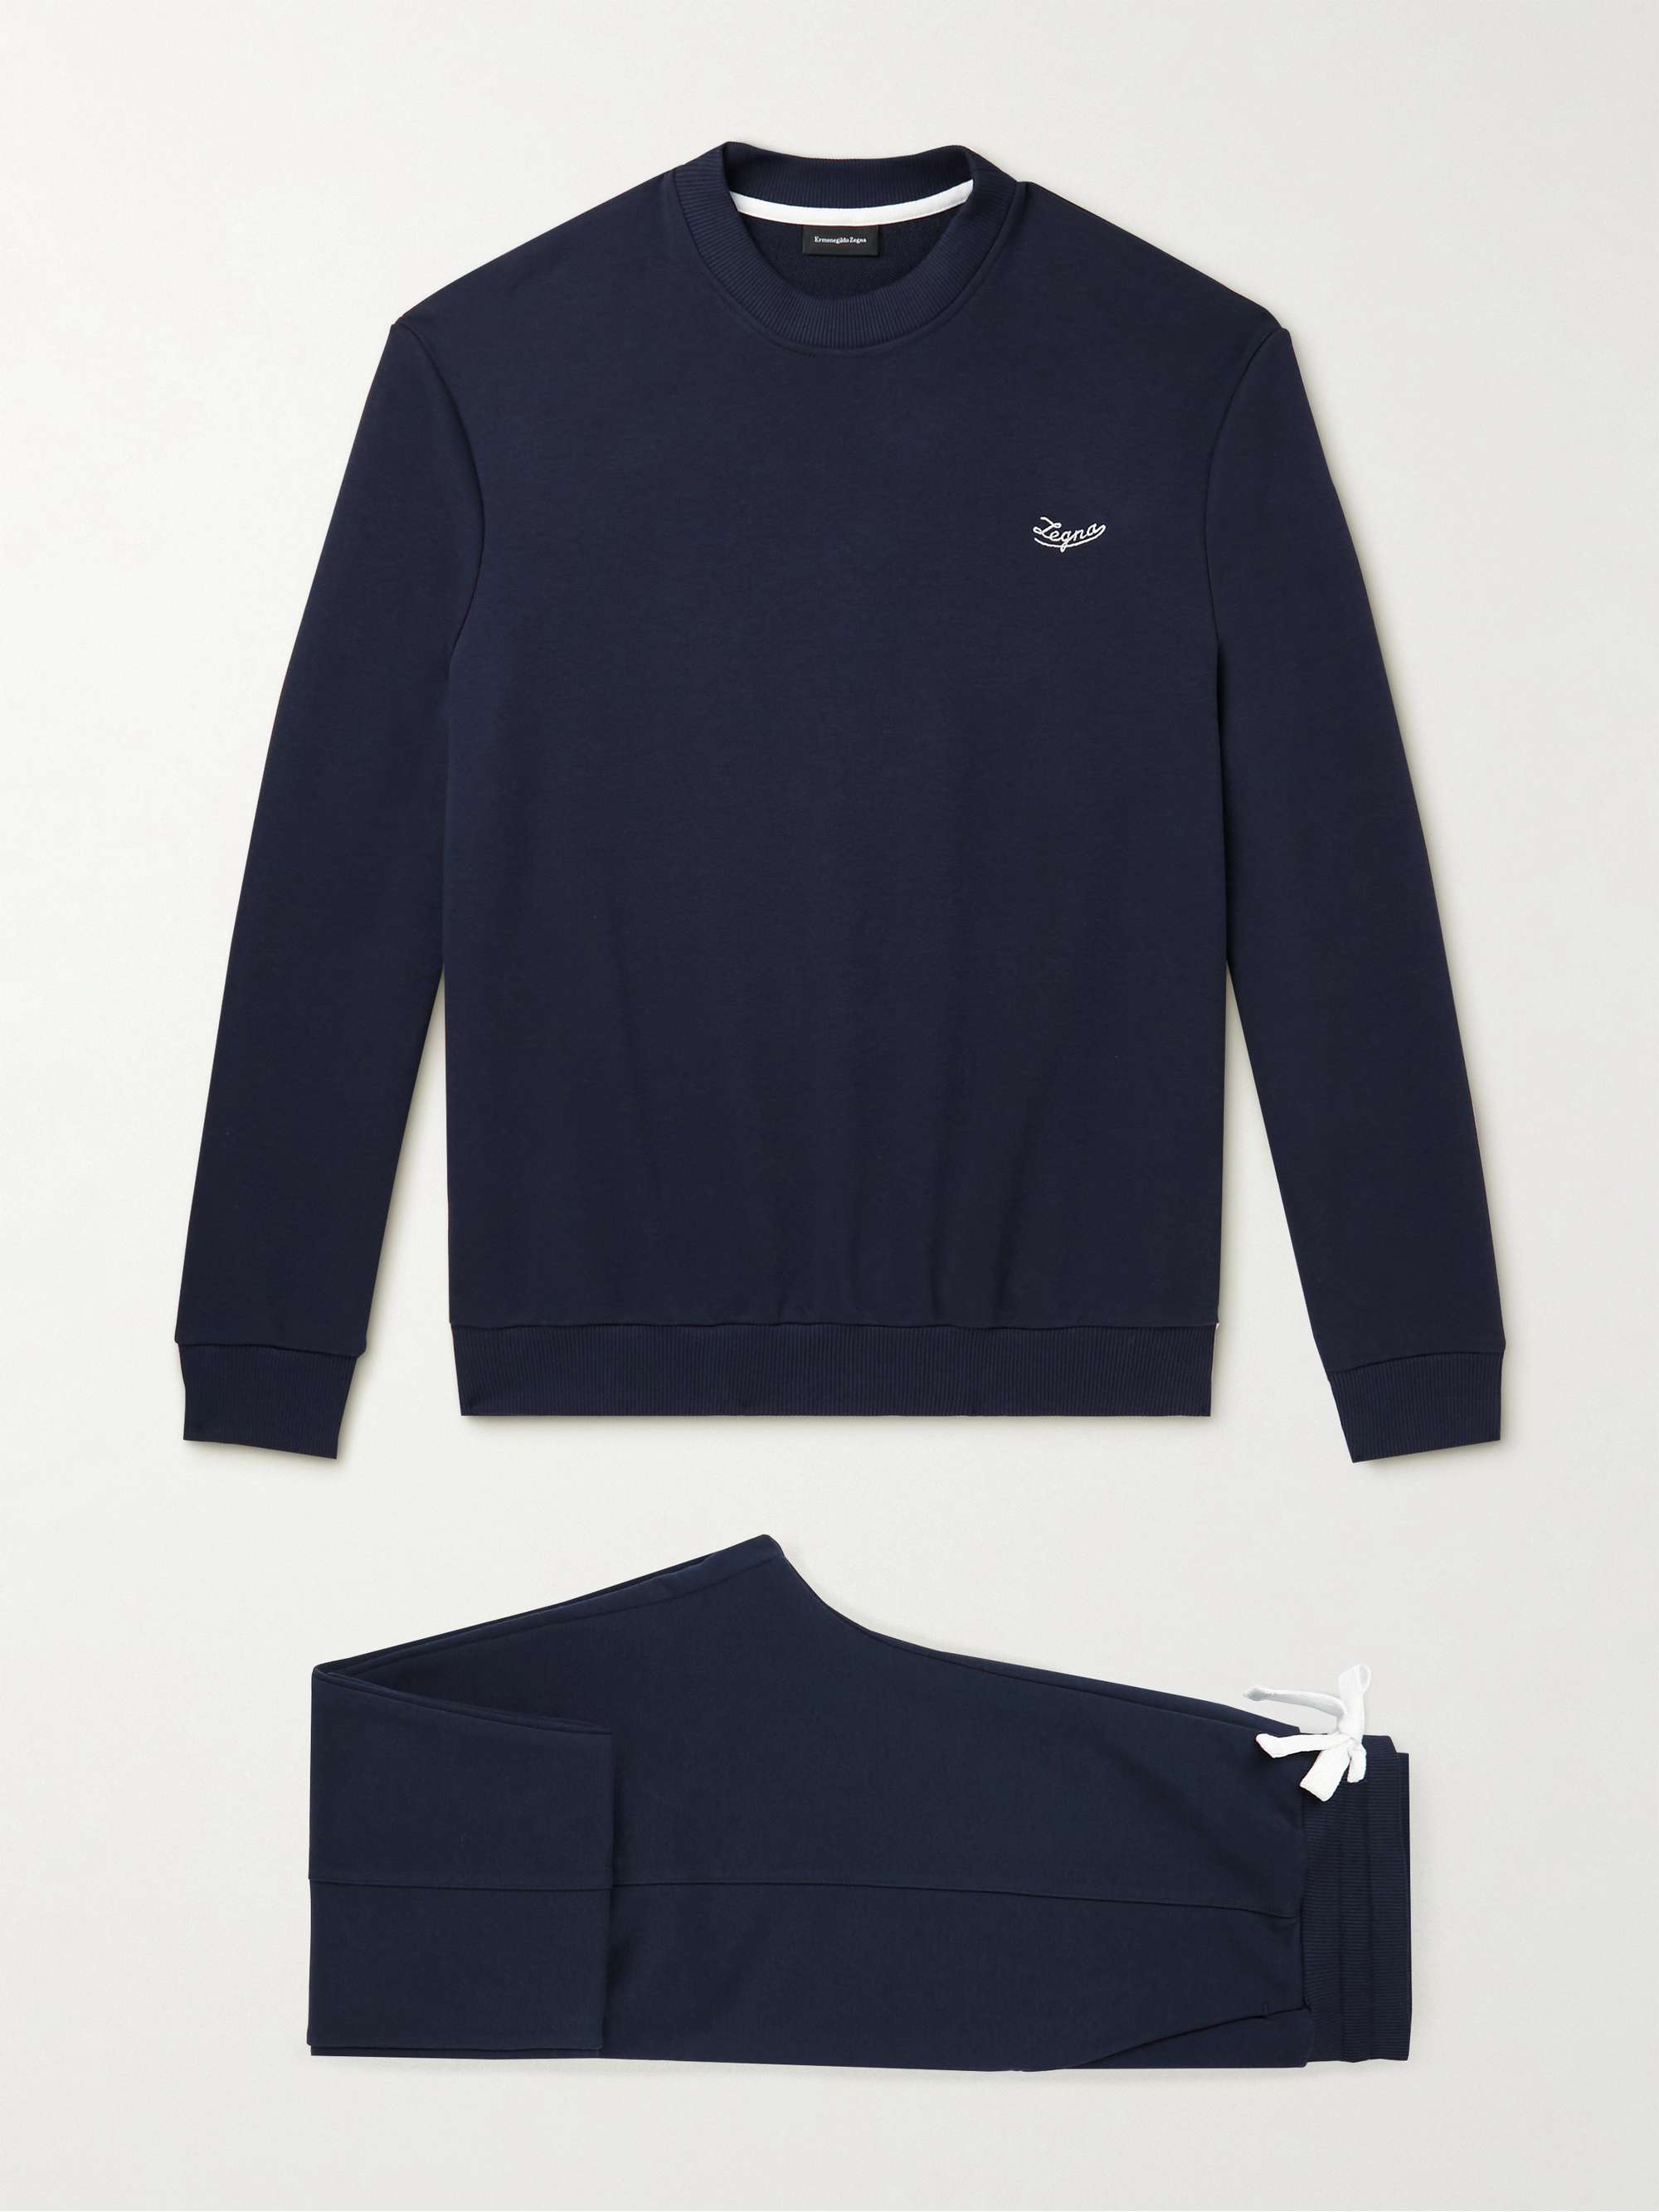 ZEGNA Logo-Embroidered Cotton-Blend Jersey Sweatshirt and Track Pants Set